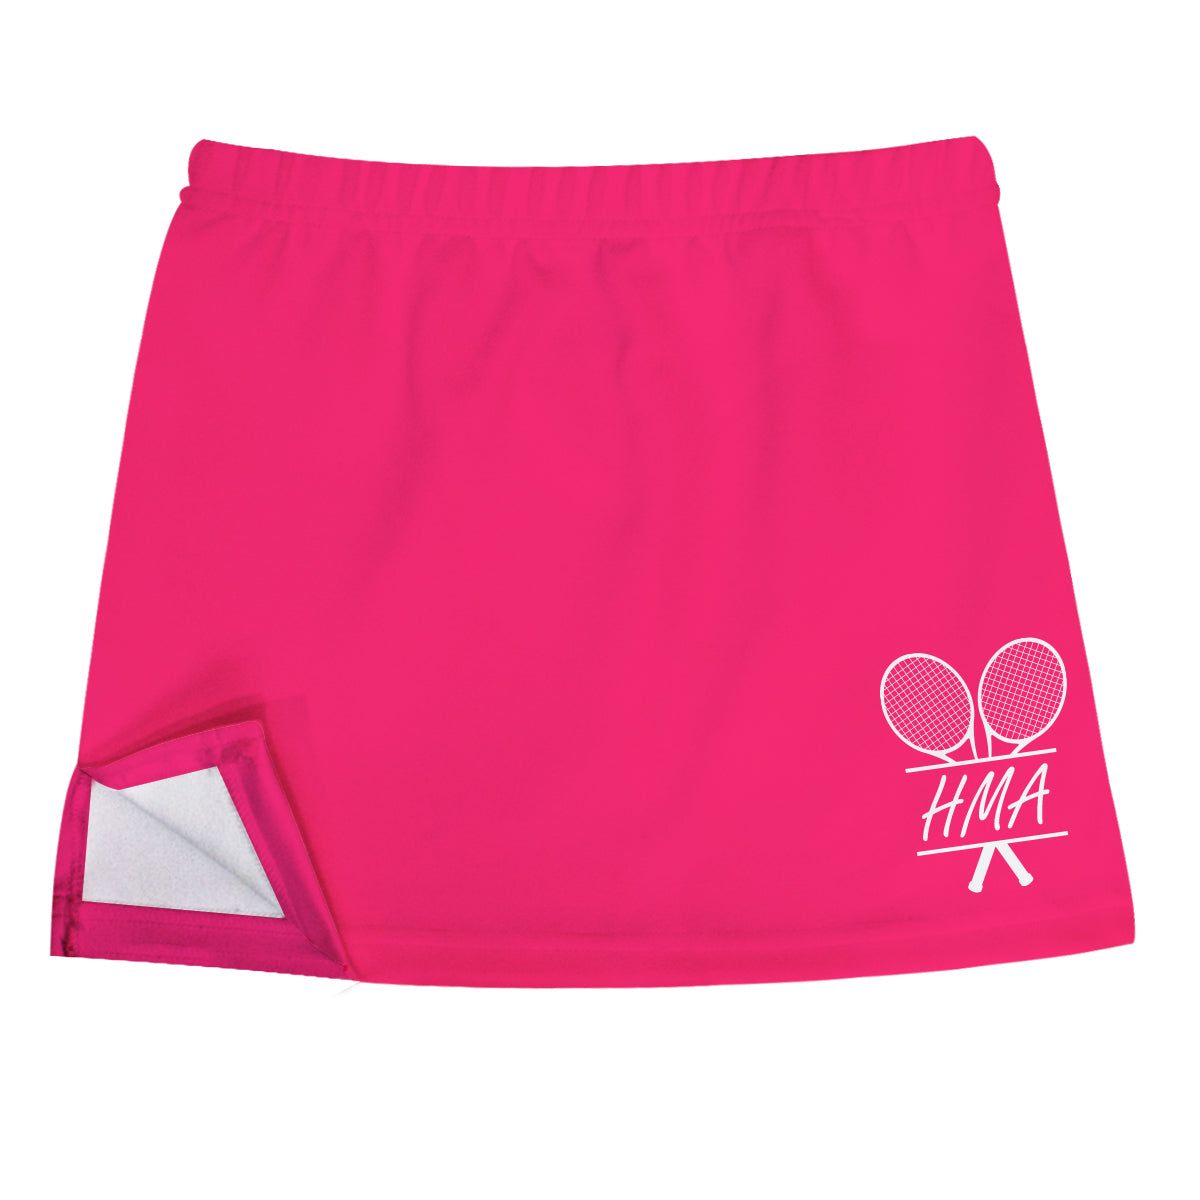 Tennis Rackets Personalized Monogram Hot Pink Skort With Side Vents